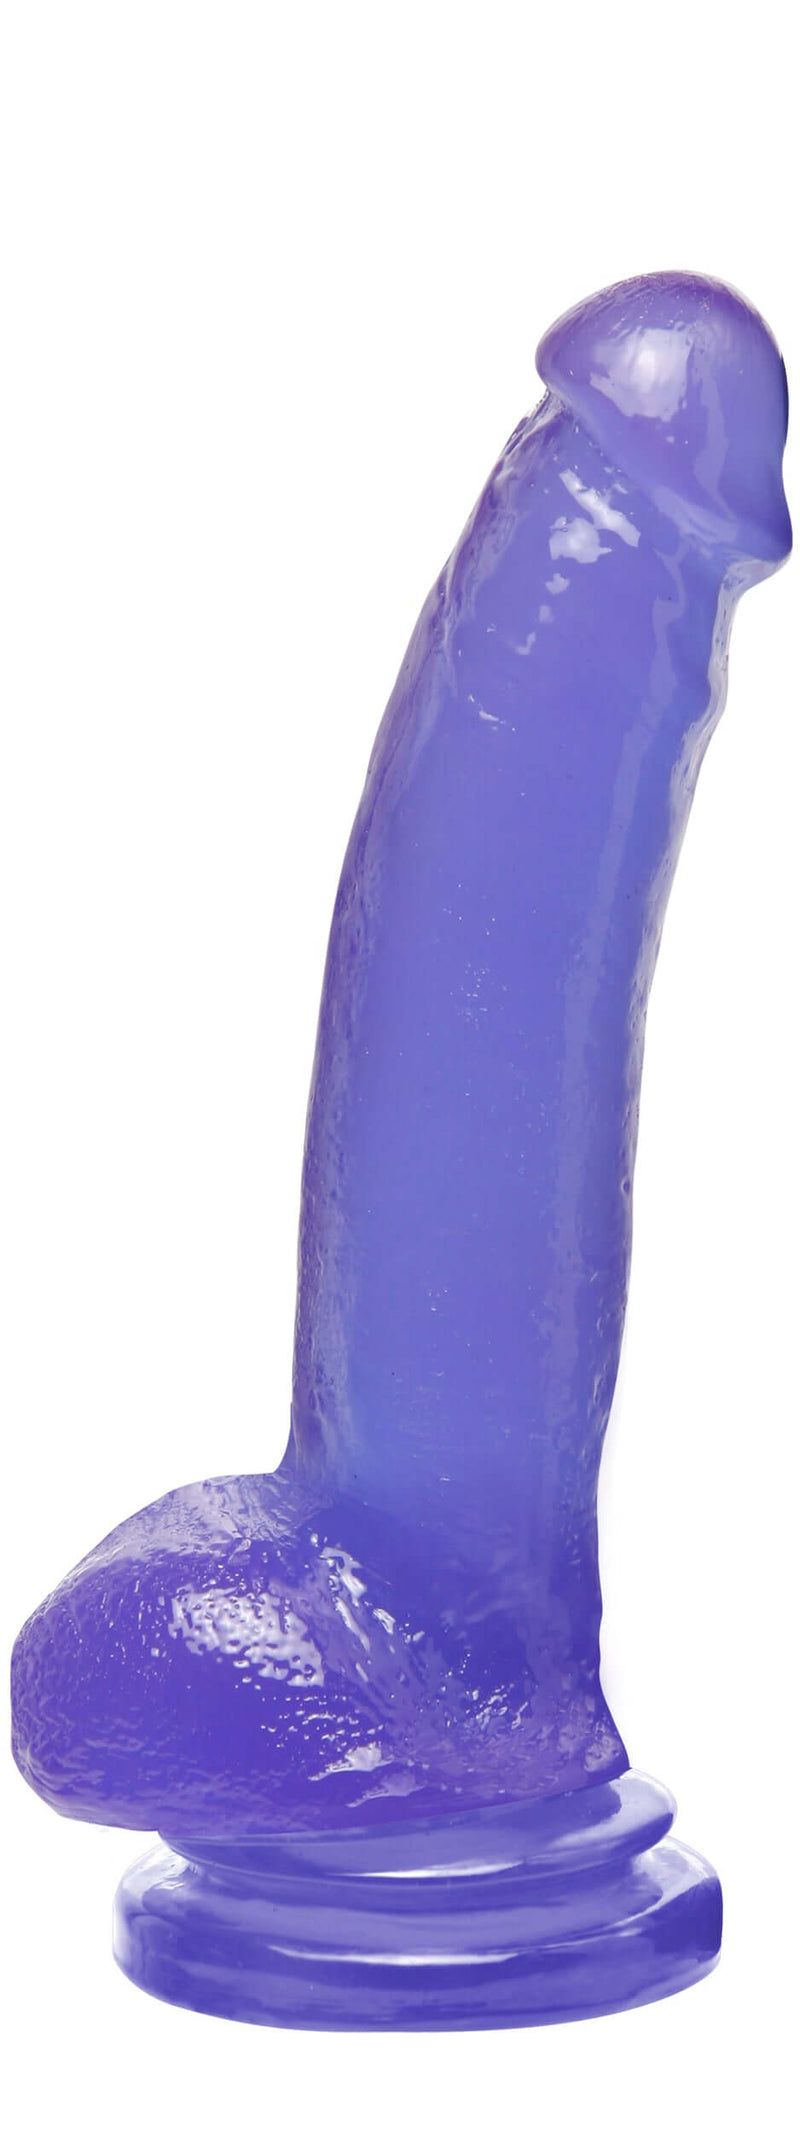 Basix Rubber Works 9" Suction Cup Thicky Dong Purple